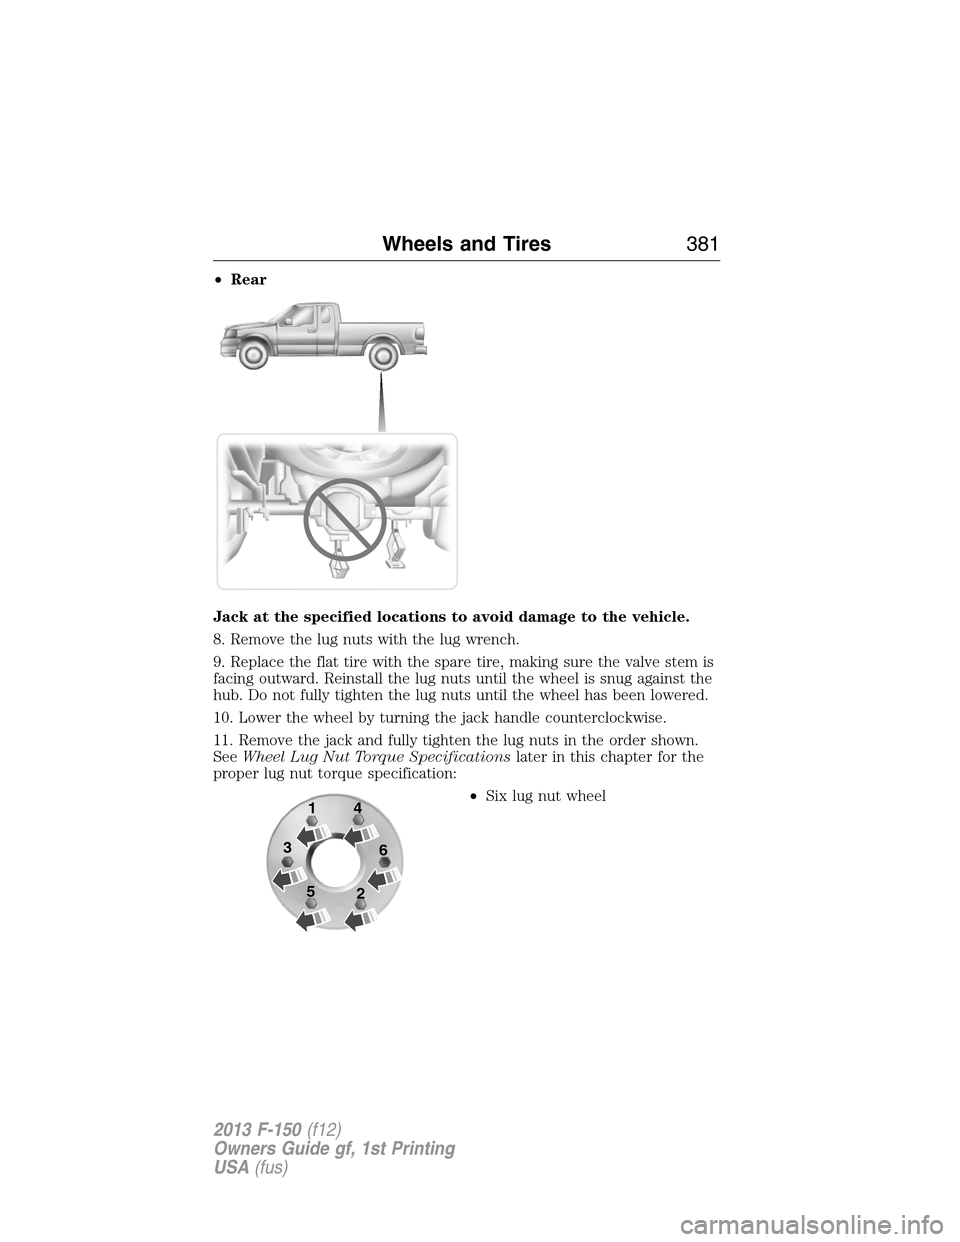 FORD F150 2013 12.G Owners Manual •Rear
Jack at the specified locations to avoid damage to the vehicle.
8. Remove the lug nuts with the lug wrench.
9. Replace the flat tire with the spare tire, making sure the valve stem is
facing o